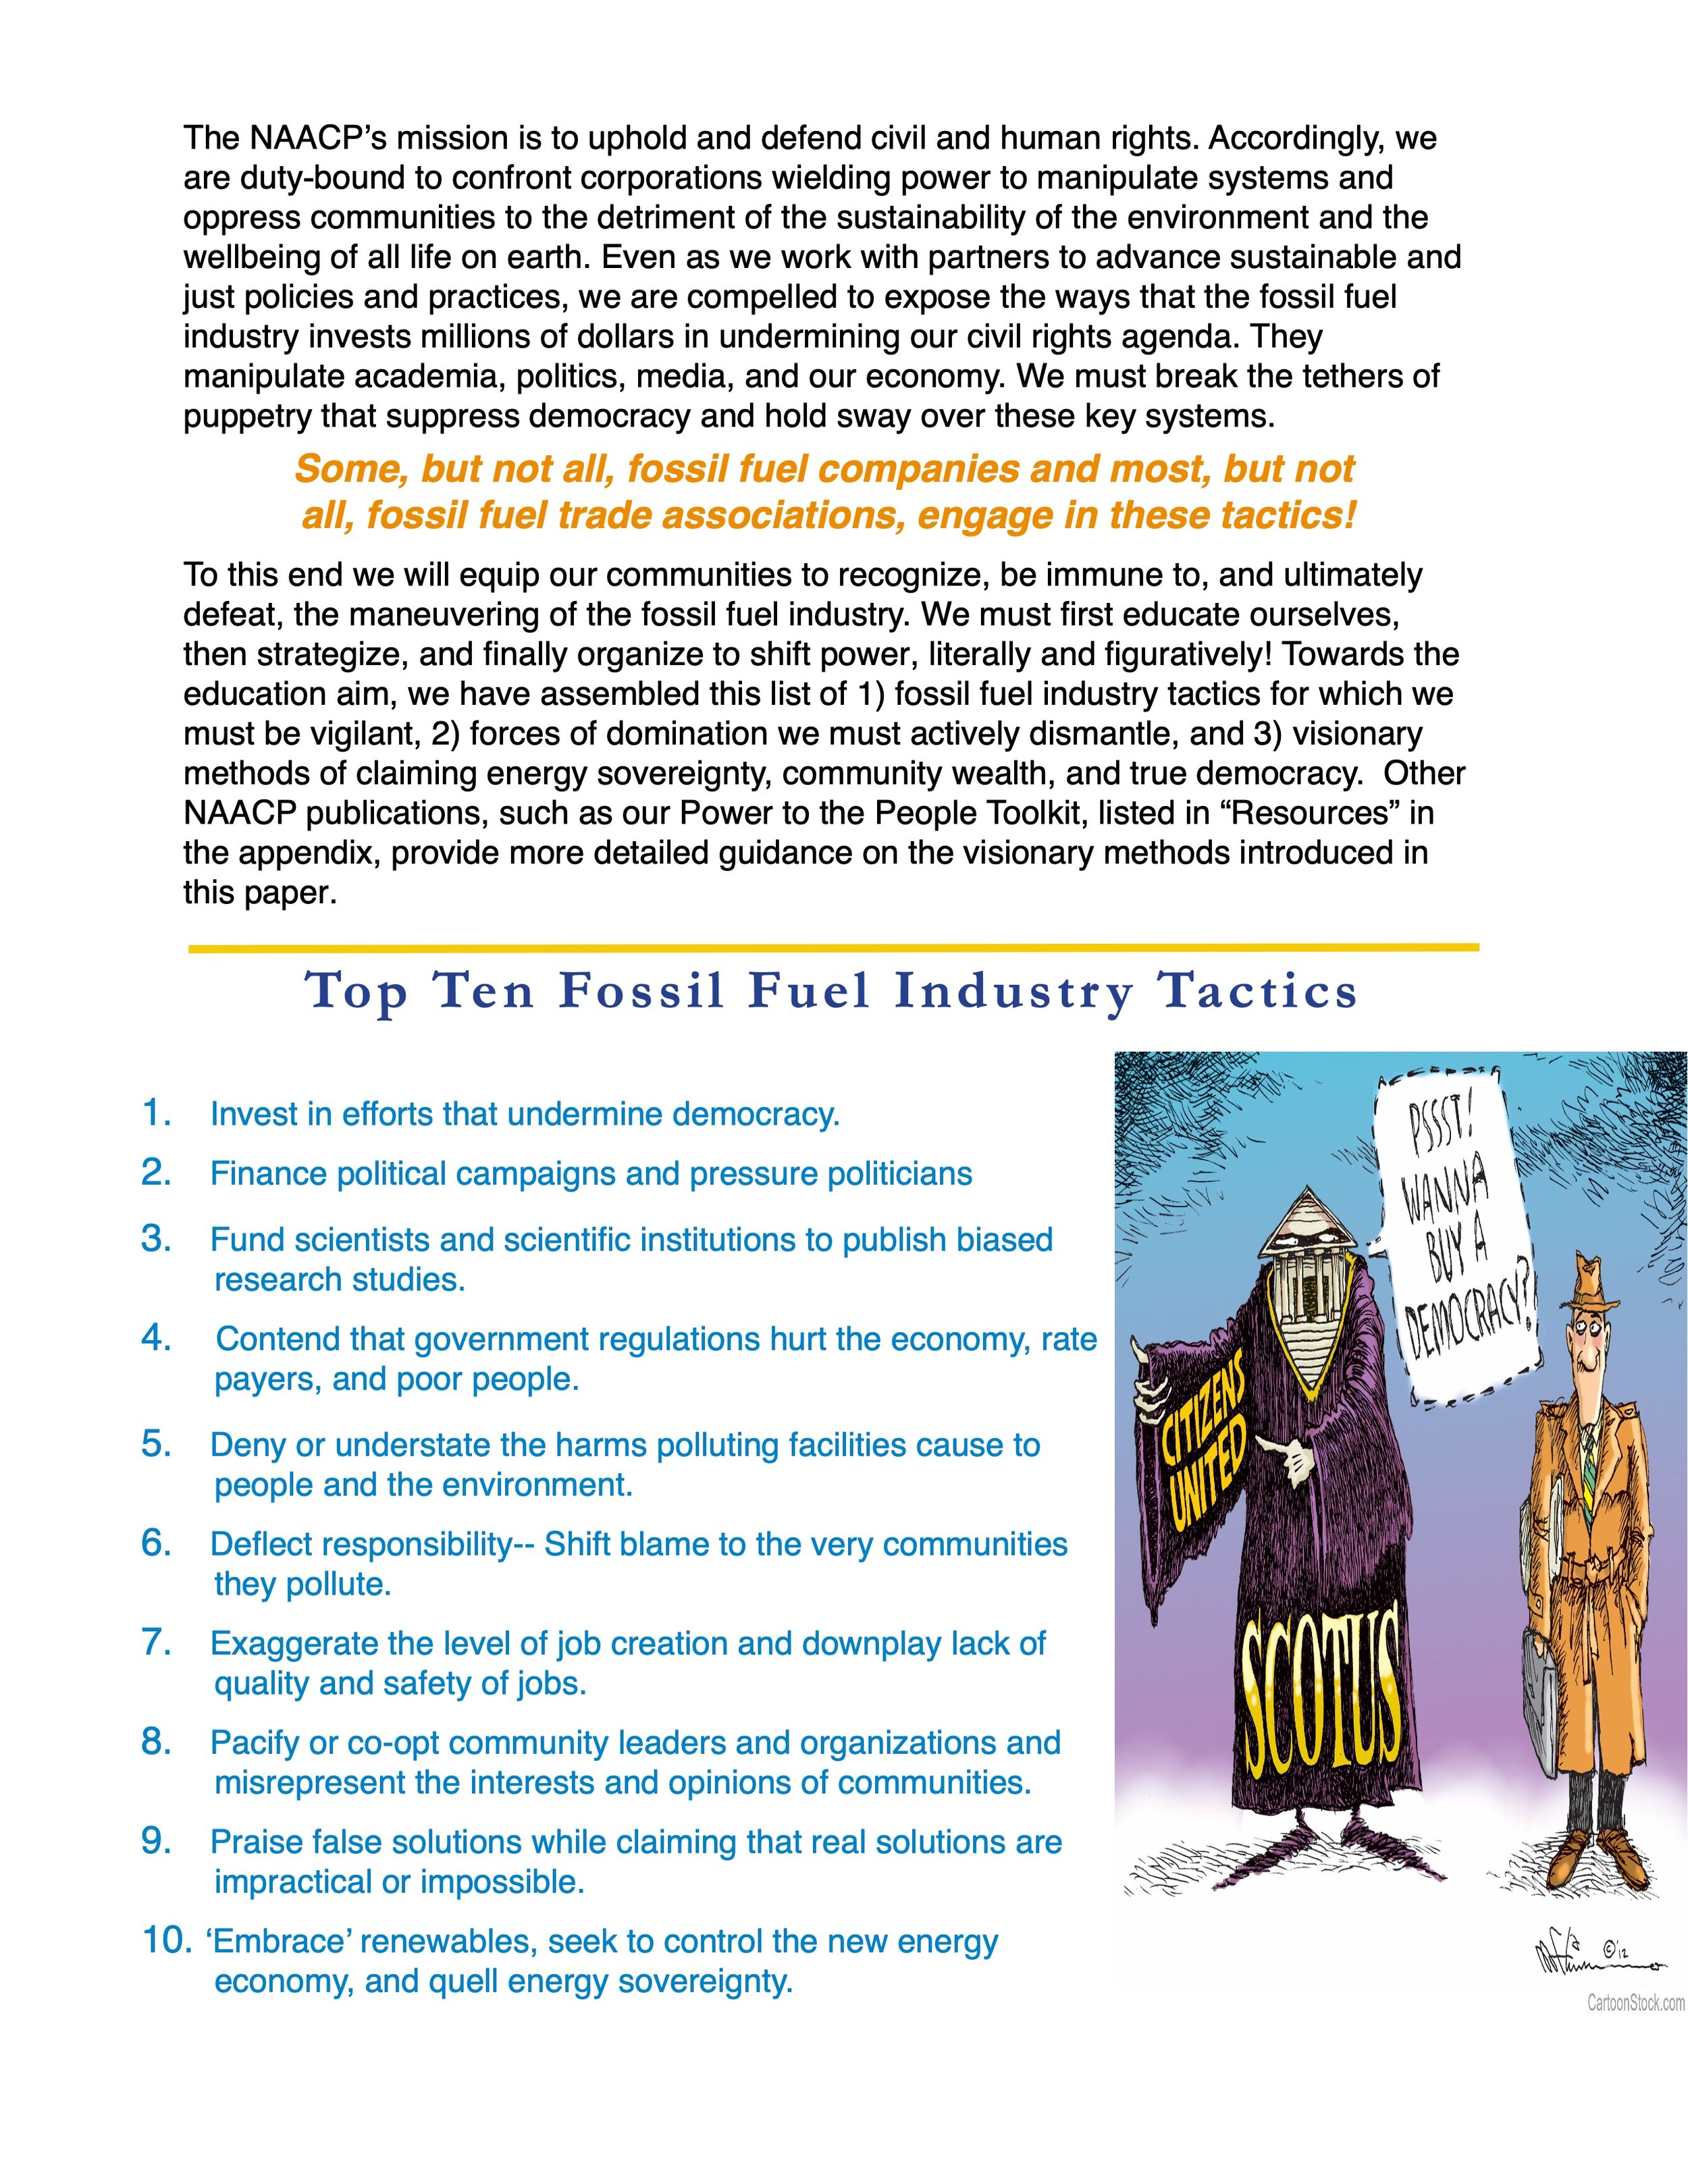 Fossil-Fueled-Foolery-An-Illustrated-Primer-on-the-Top-10-Manipulation-Tactics-of-the-Fossil-Fuel-Industry 4.jpeg